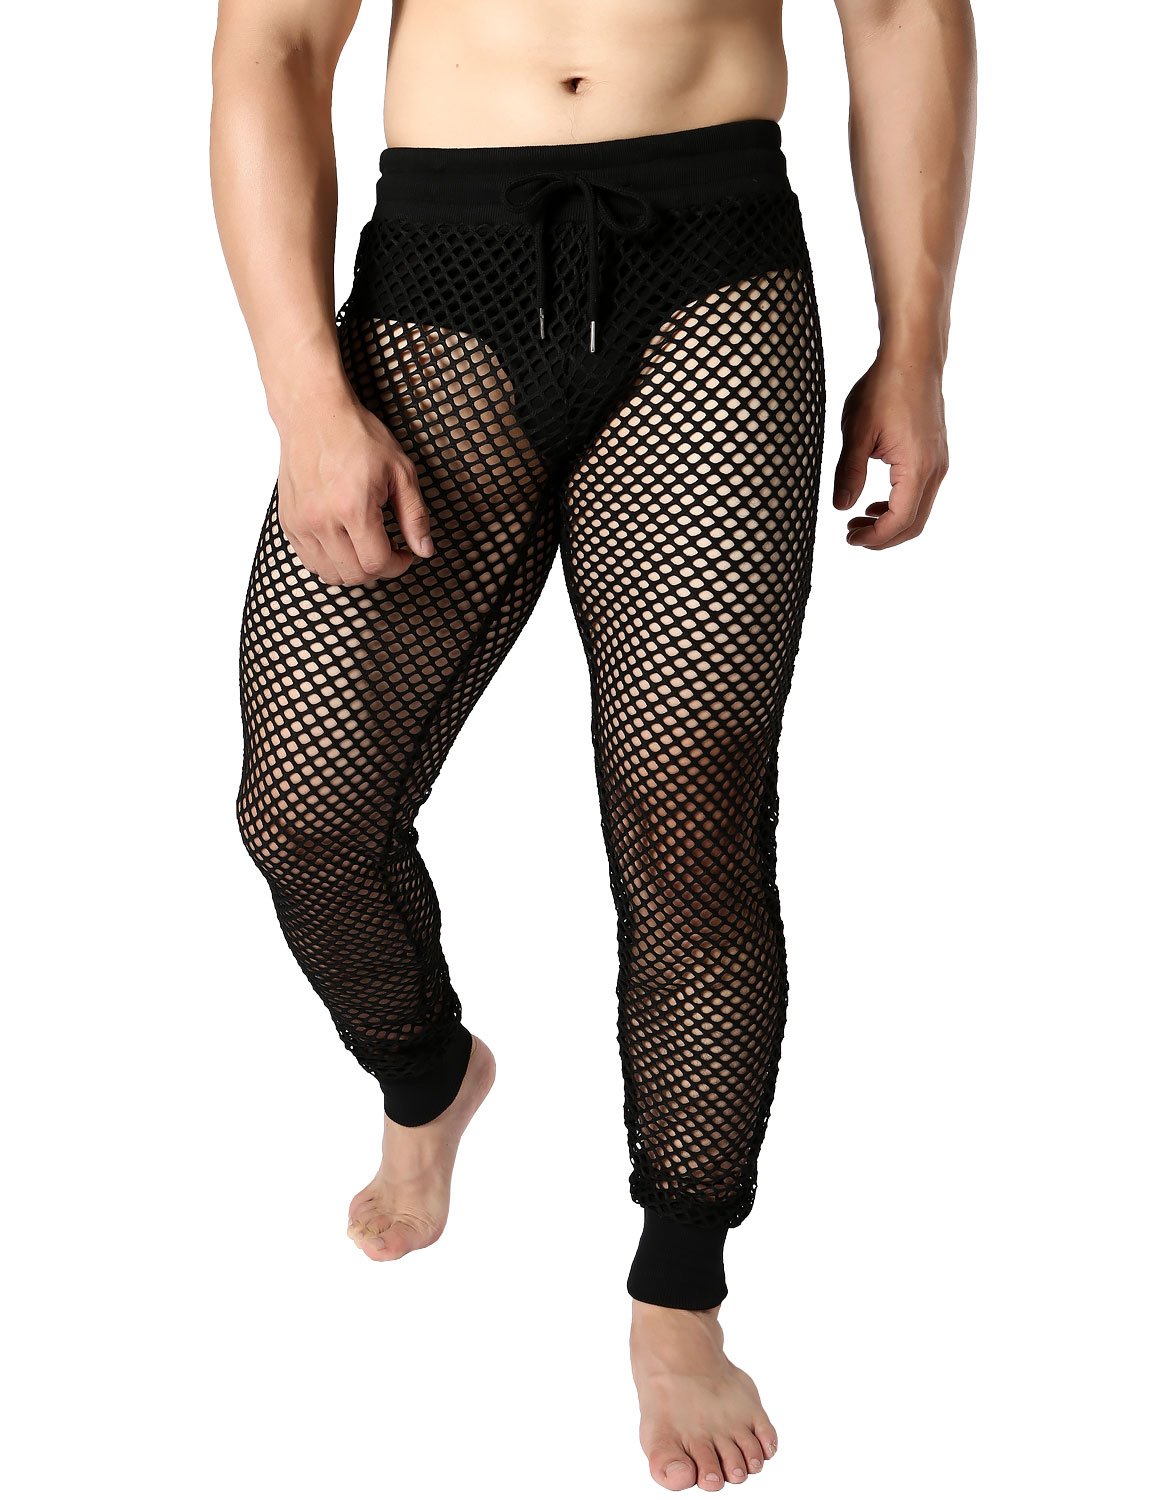 JOGAL Men's Mesh Fishnet See Through Pants Stretchy Muscle